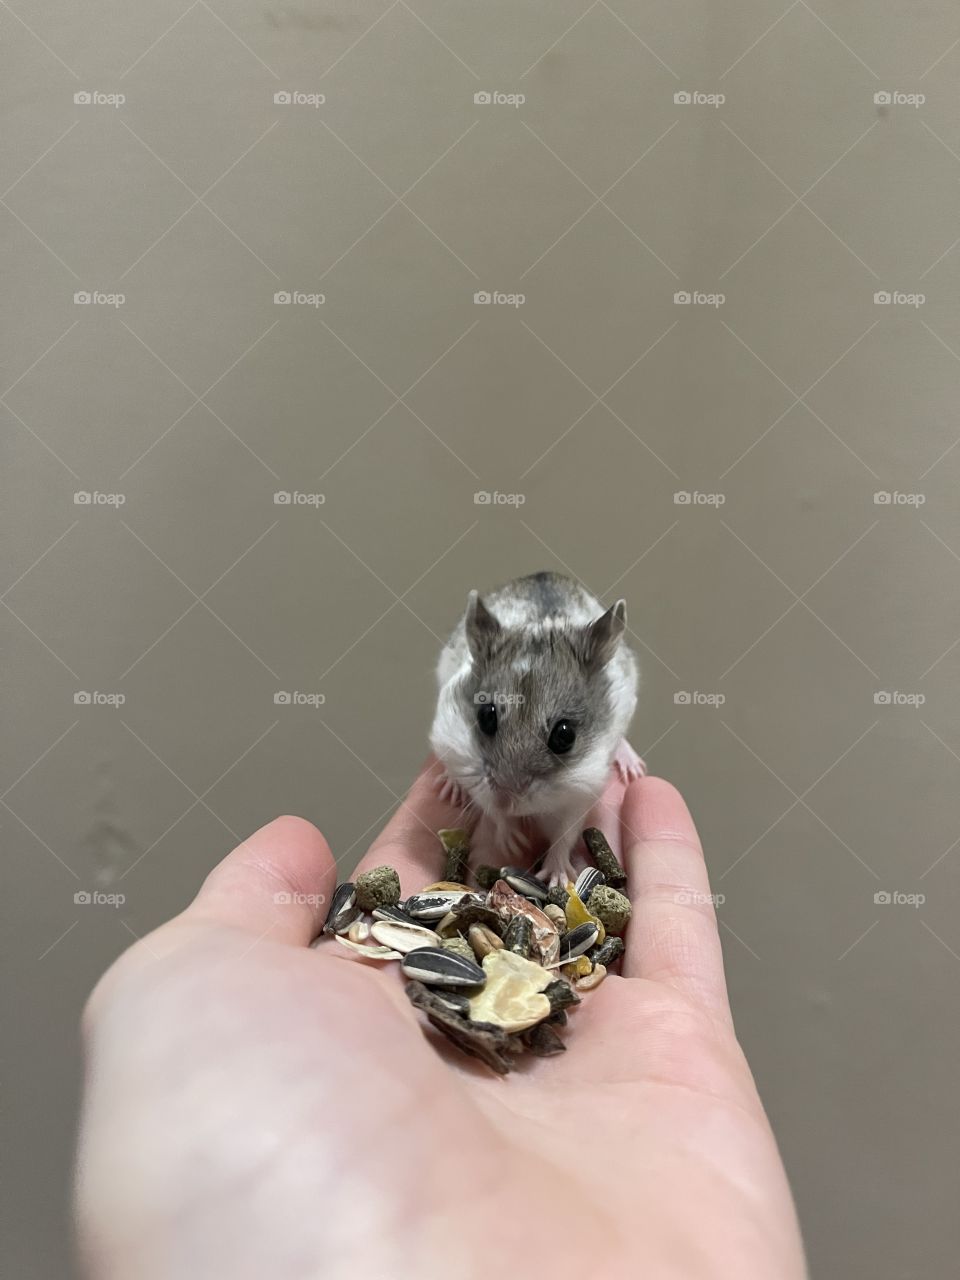 Hamster eating nuts and core from his owners hand